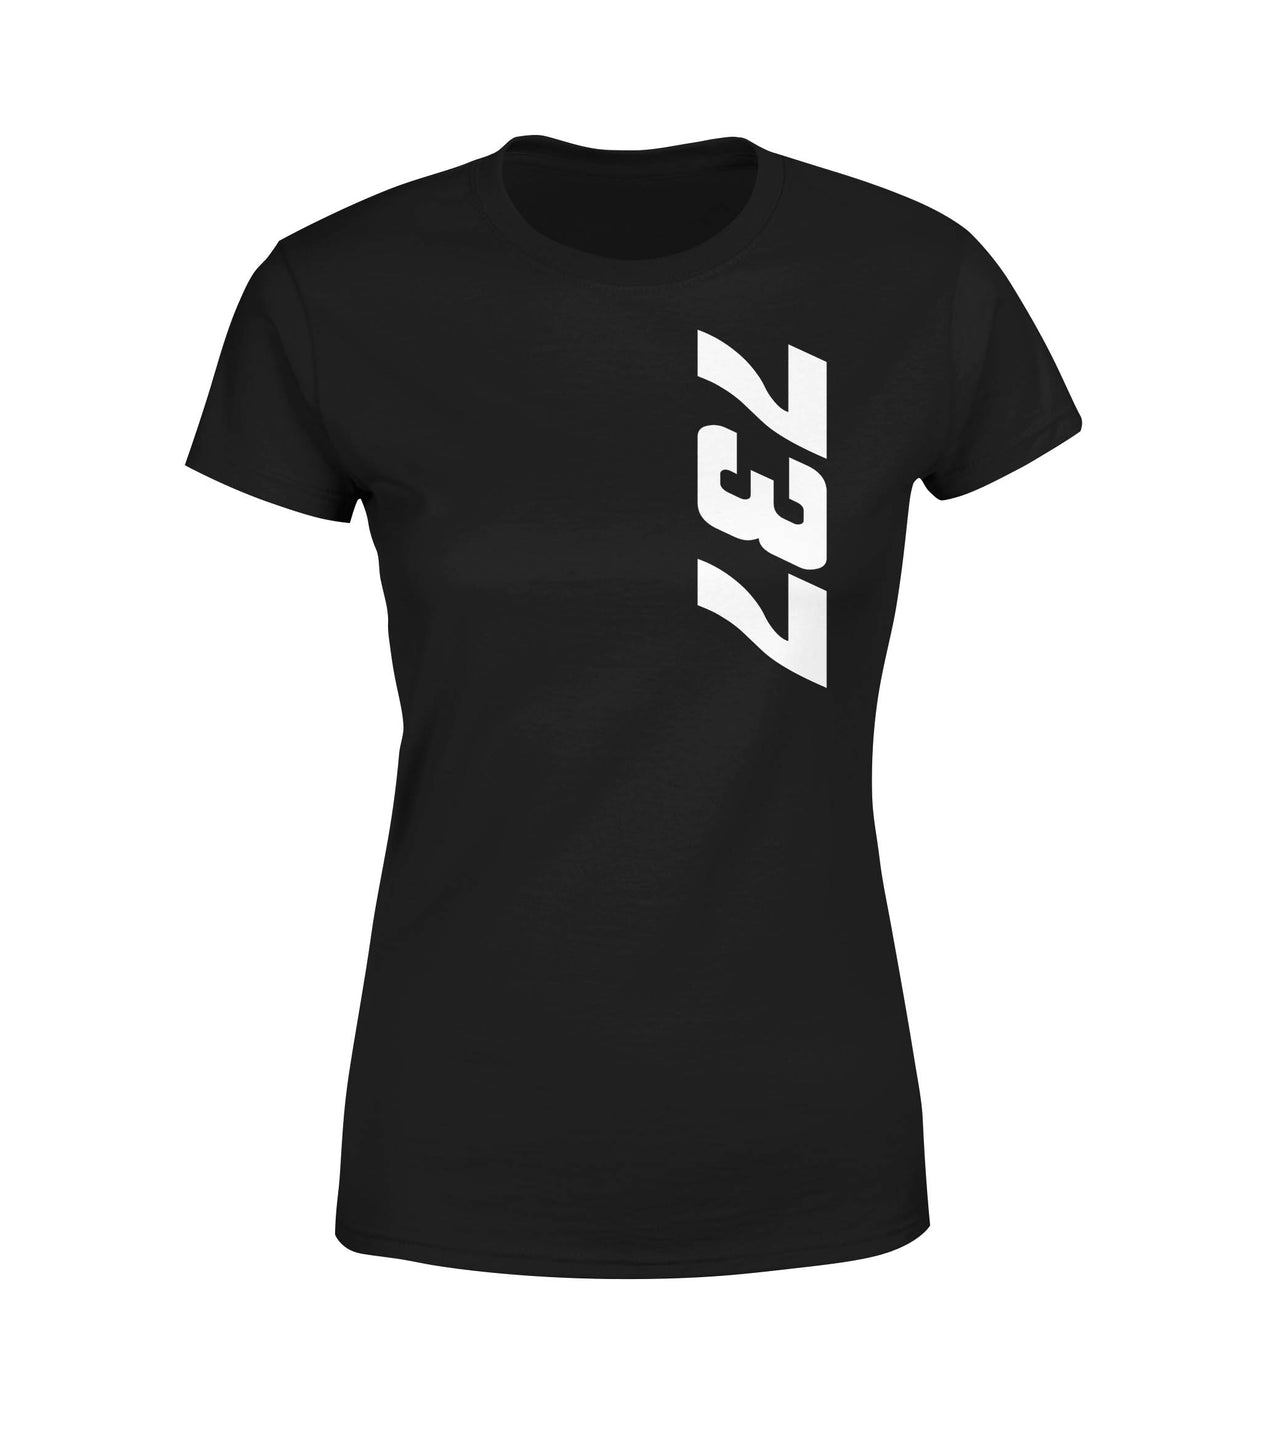 737 Side Text Designed Women T-Shirts